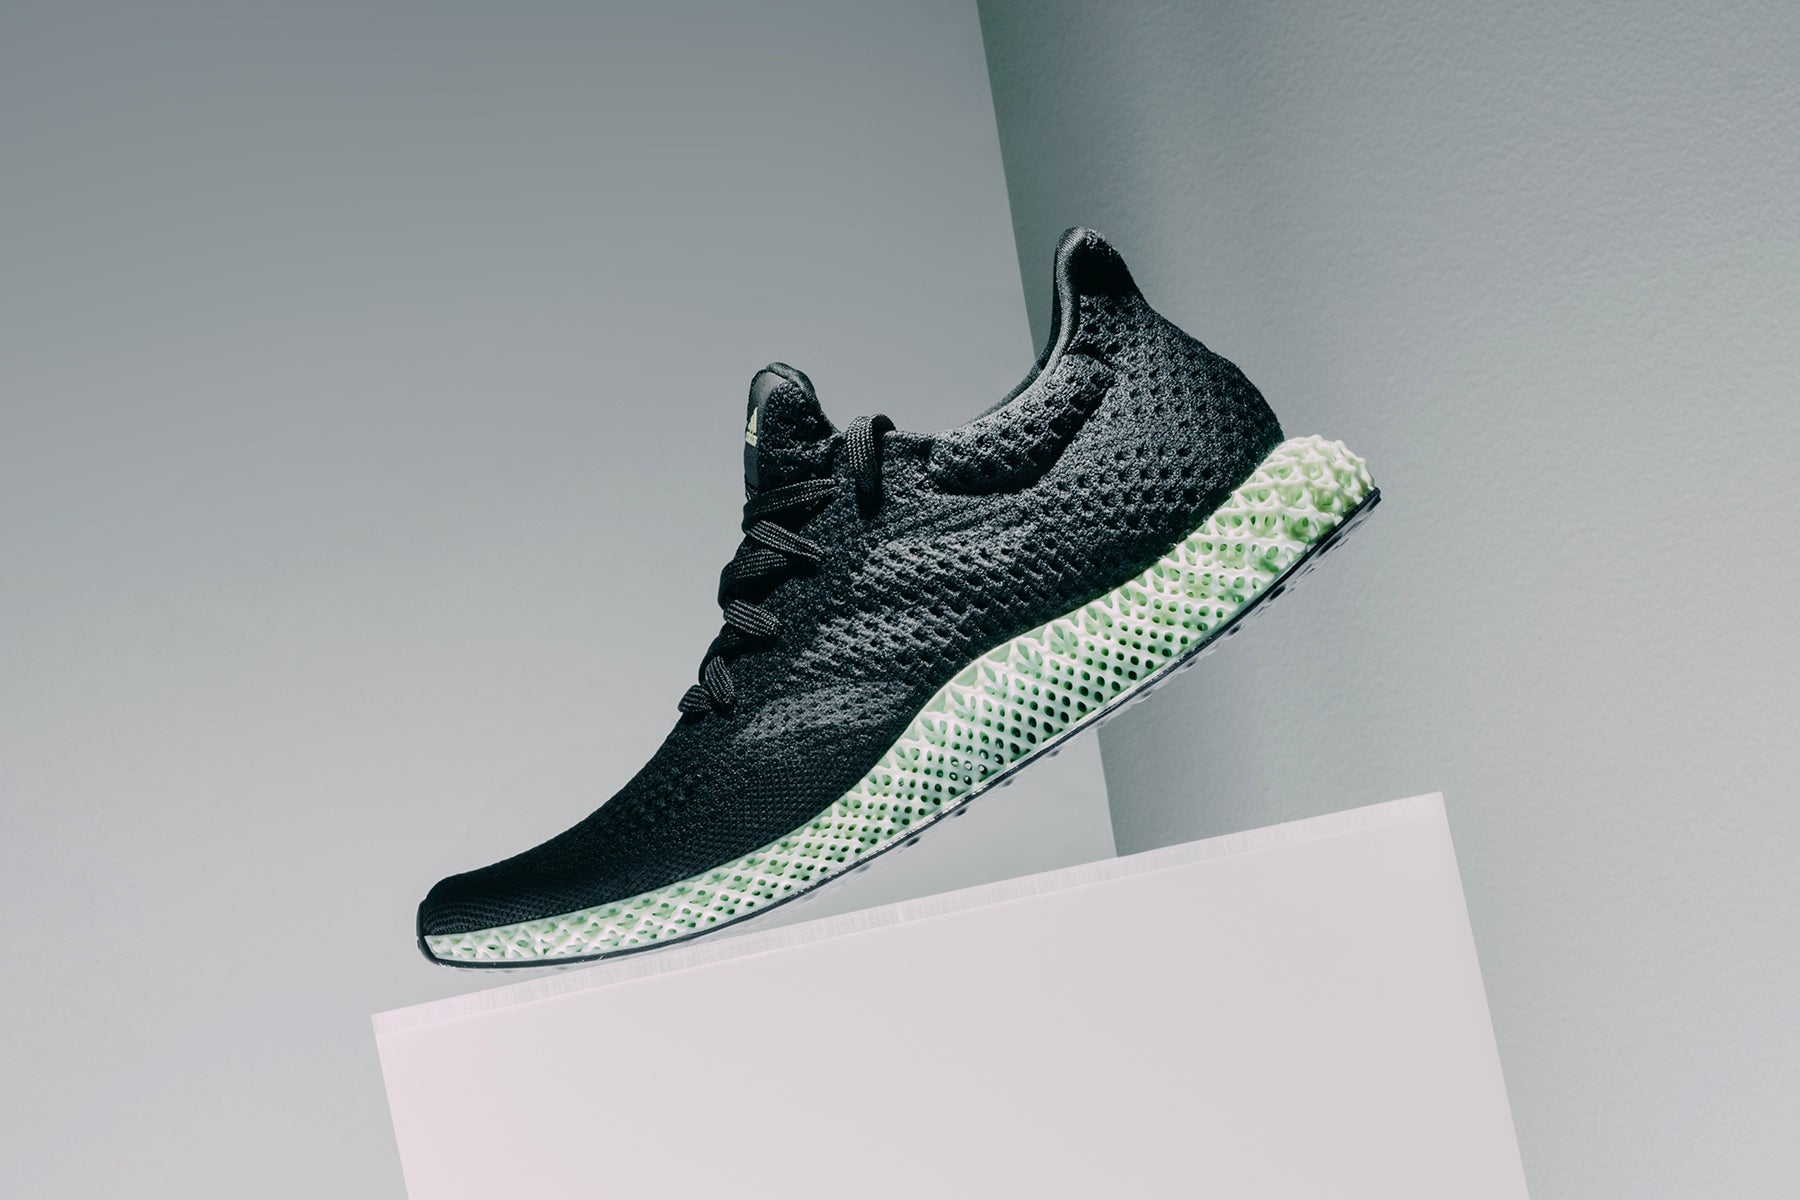 Adidas Original 4D Futurecraft is Available + Online – Feature